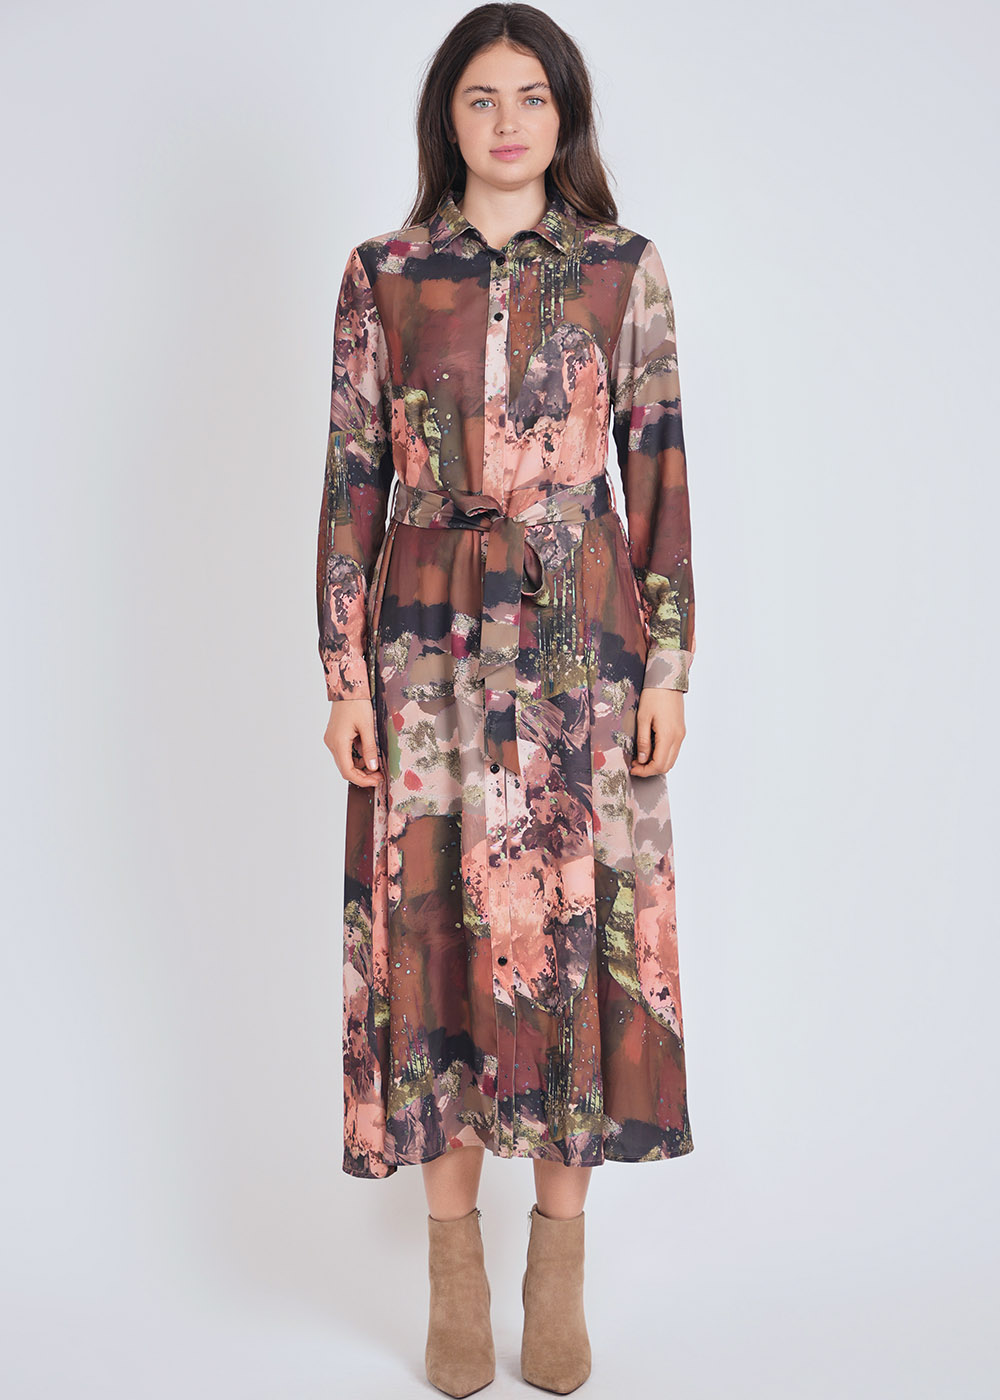 Belted Brown Dress with Abstract Print & Long Sleeves